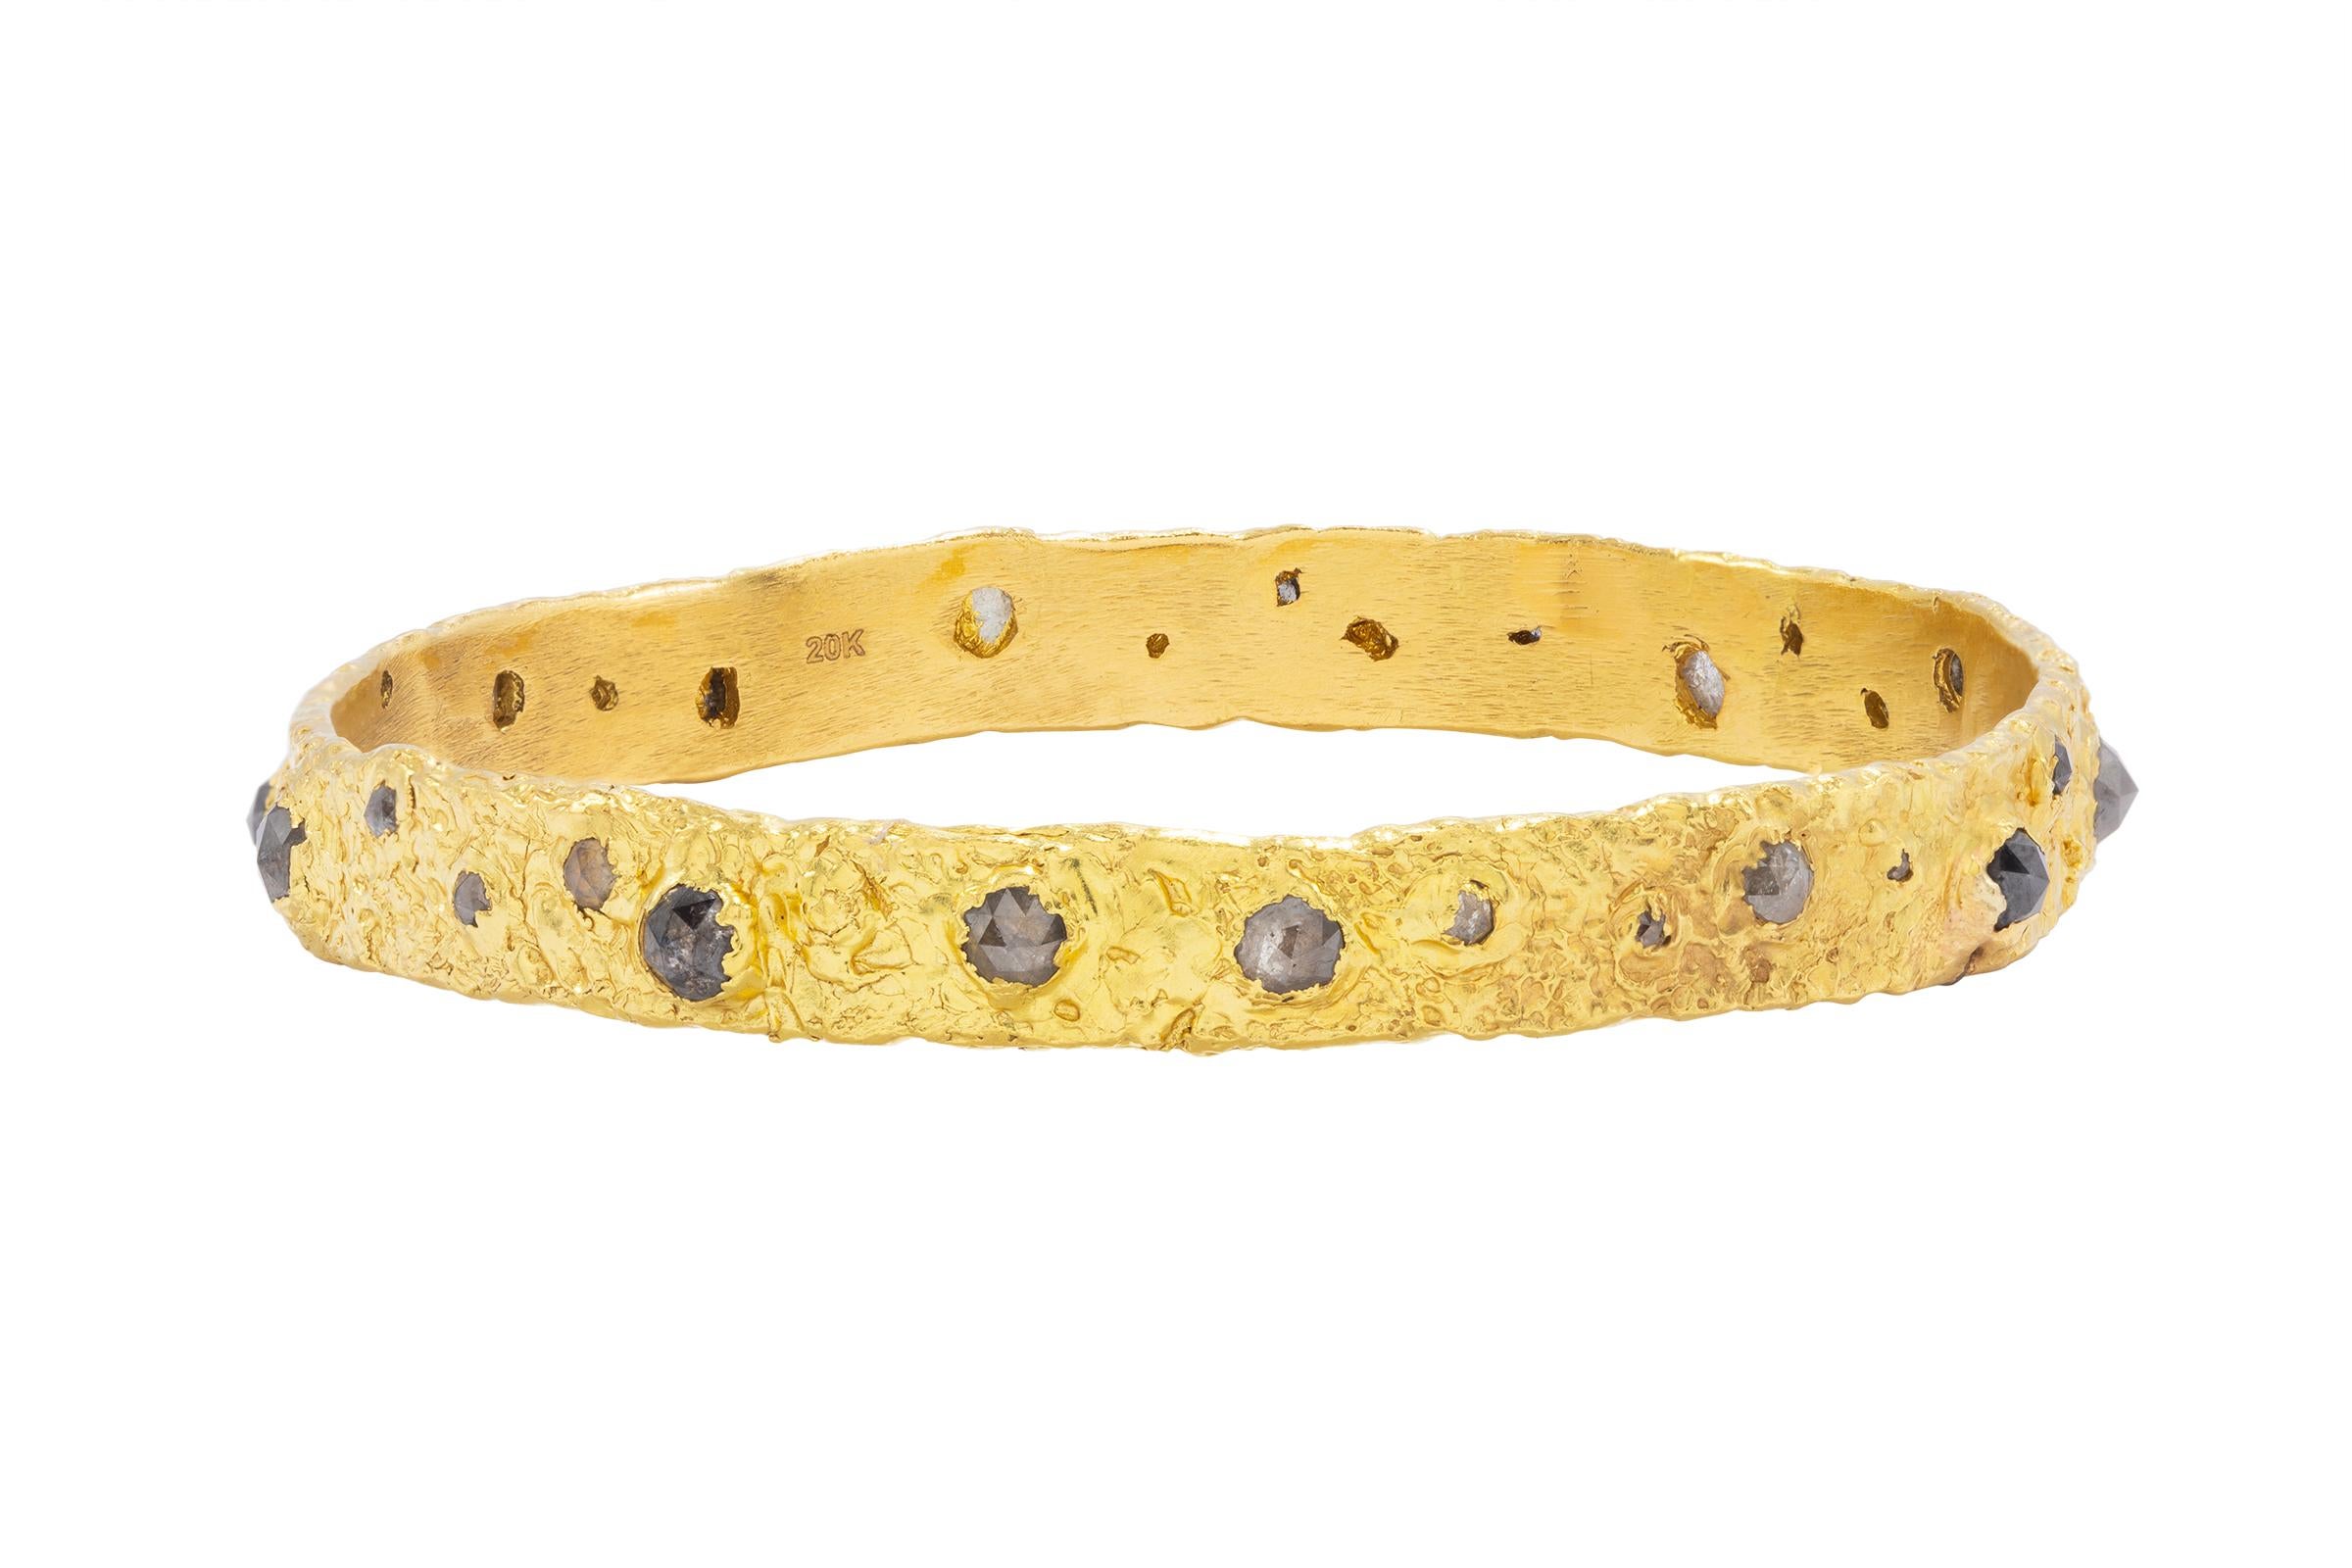 The Hera 20k Gold Bangle with Salt and Pepper Diamonds set beautifully around this gorgeous piece. The Hera is hand made, one of a kind and features Tagili Designs signature finish. Part of The Goddess Collection. The ultimate in feminine power.